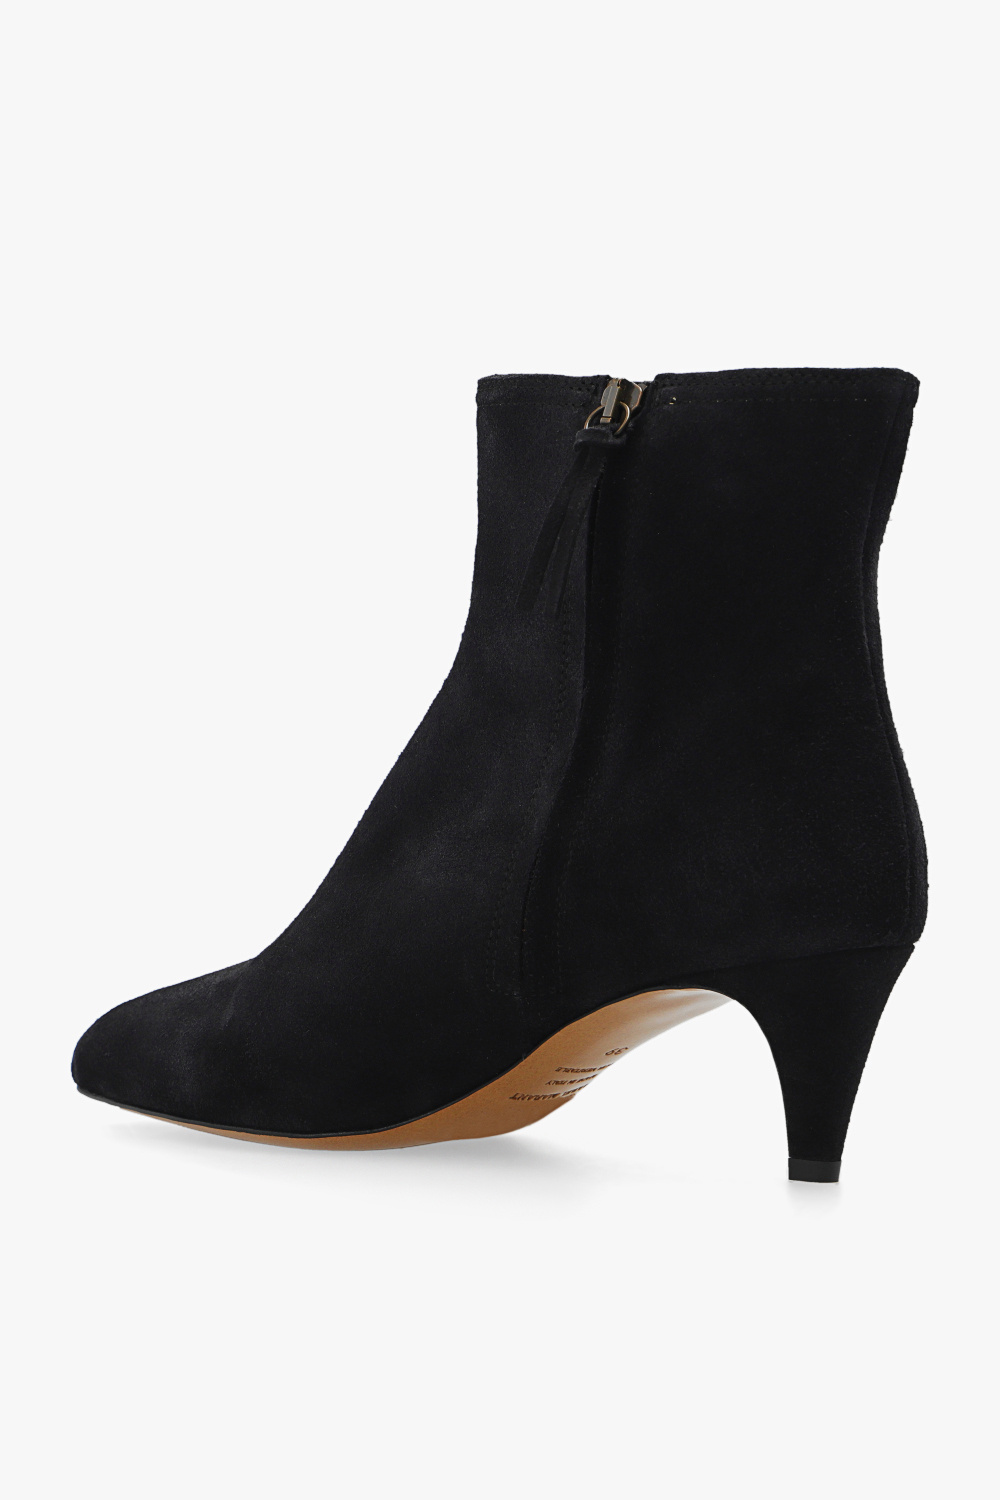 Isabel Marant ‘Deone’ heeled feature boots